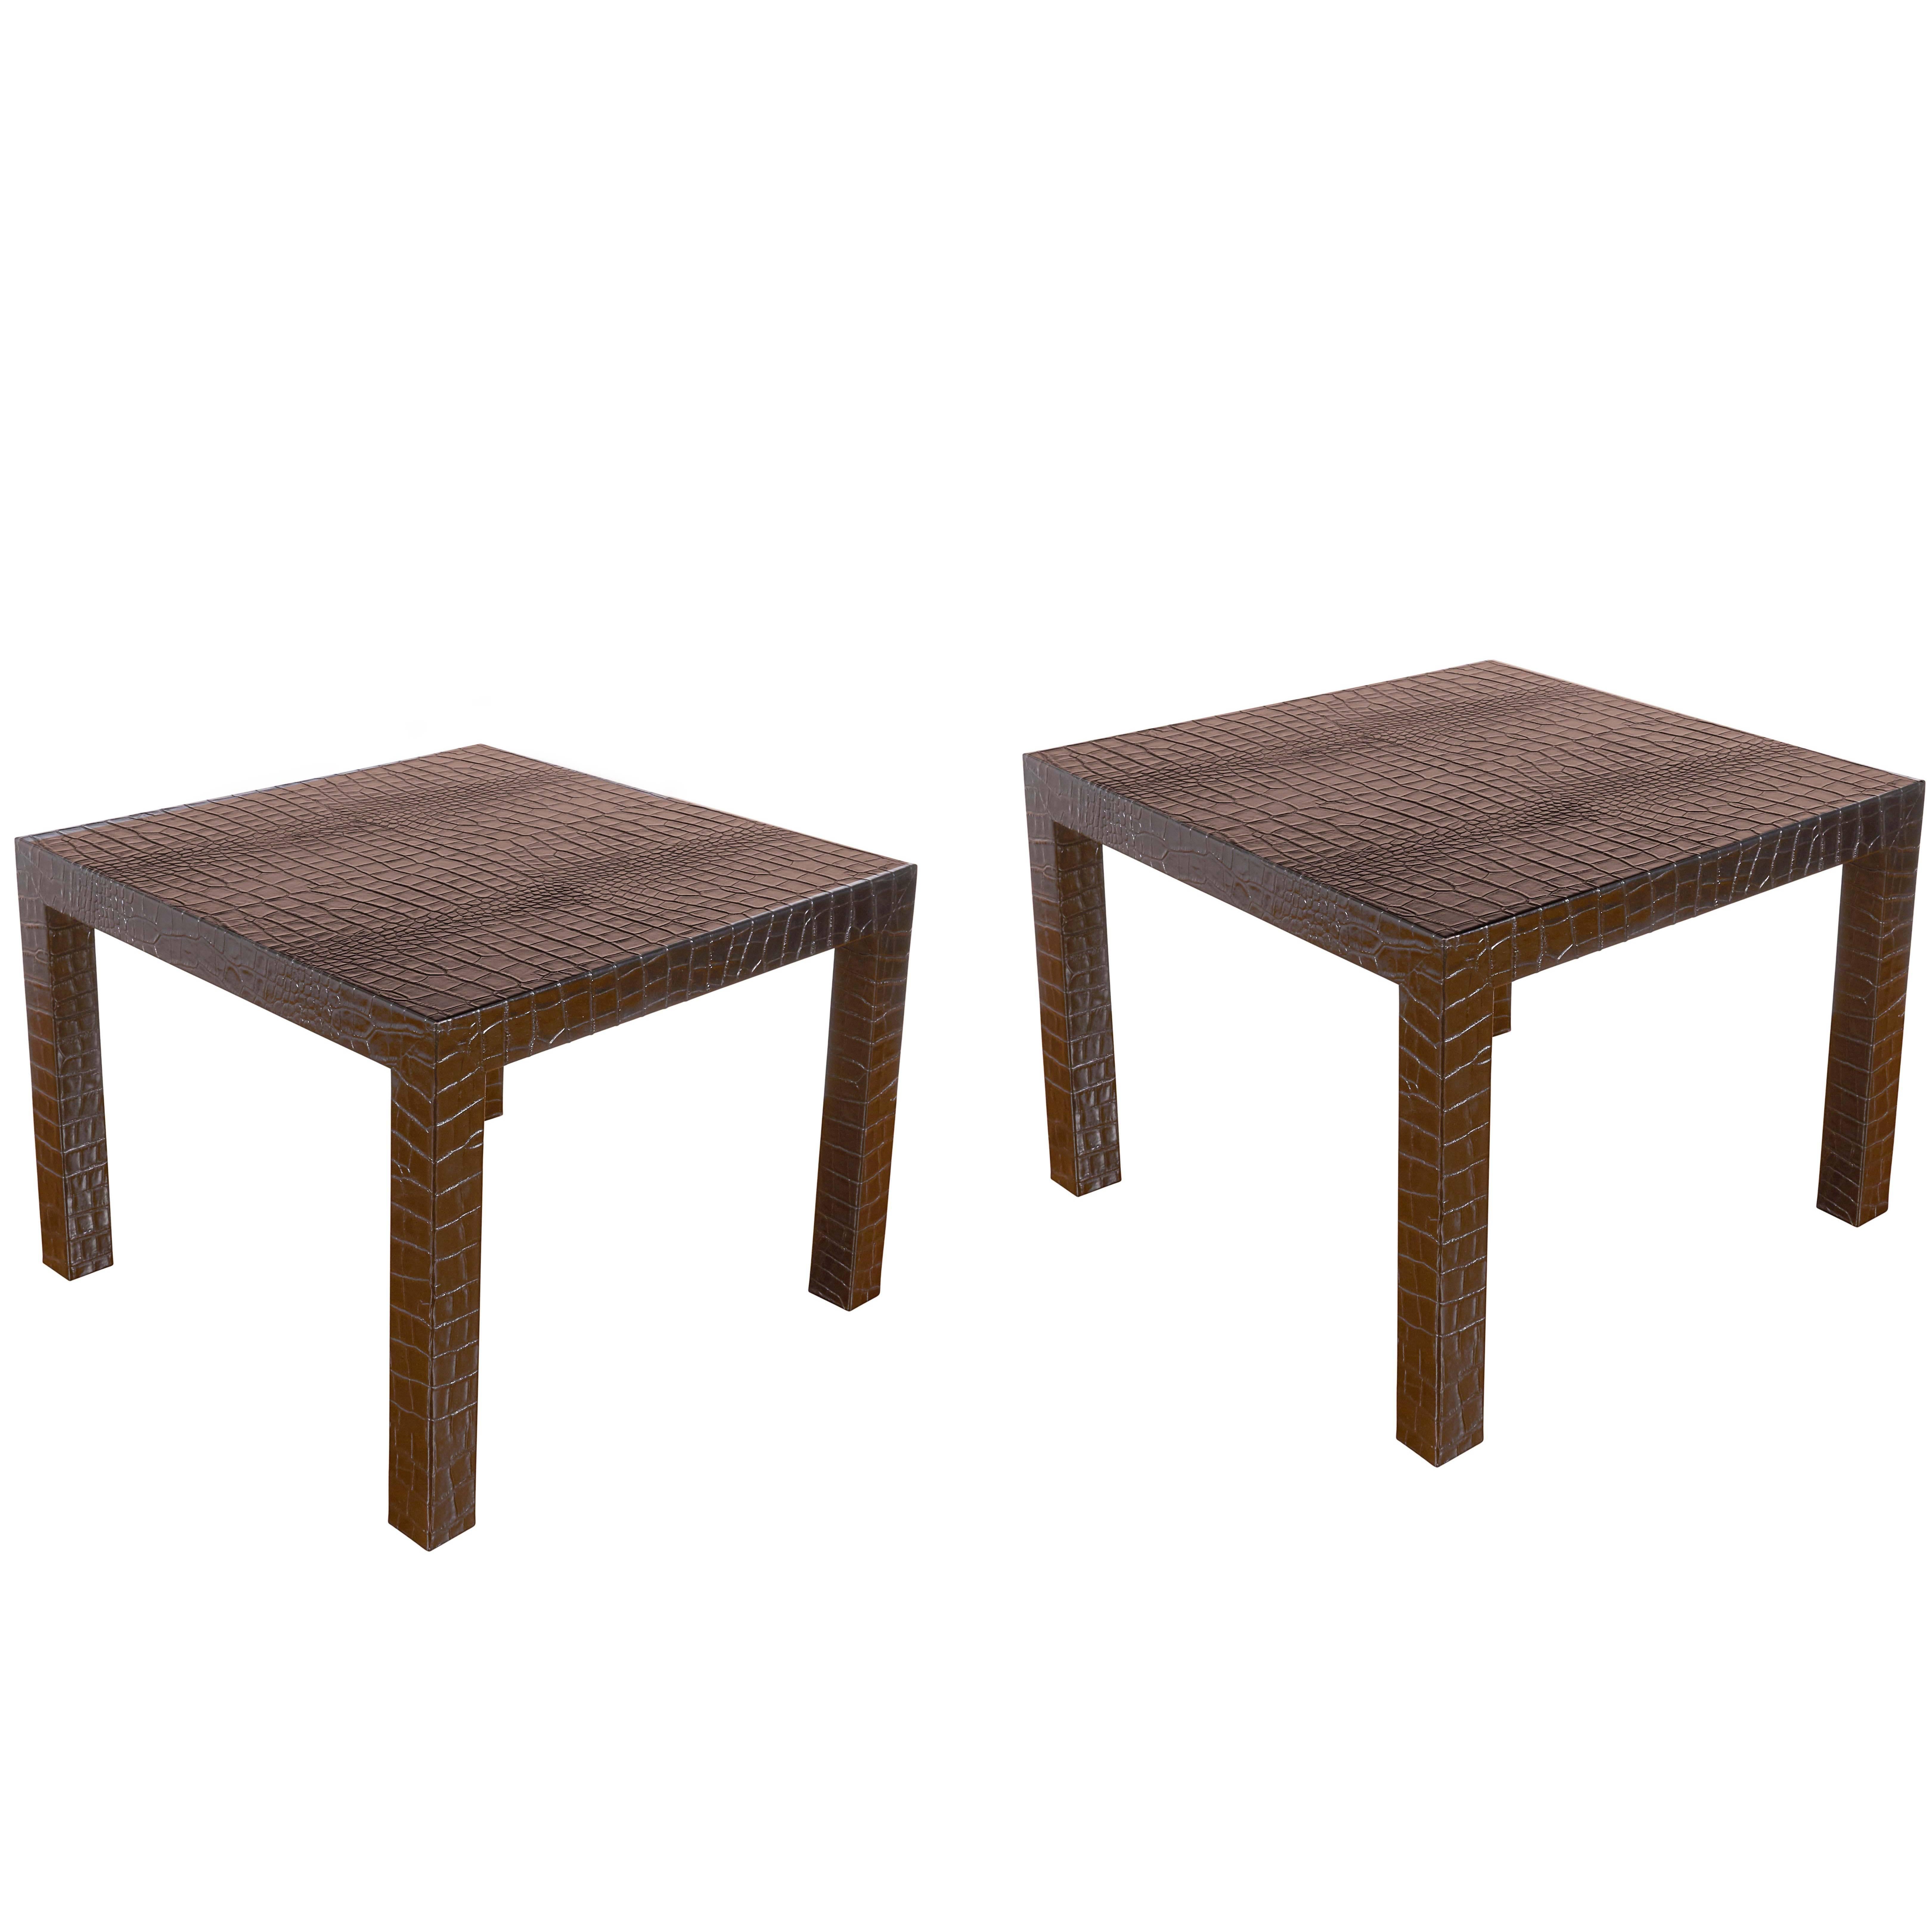 Pair of Karl Springer Style Tables in Alligator Embossed Leather